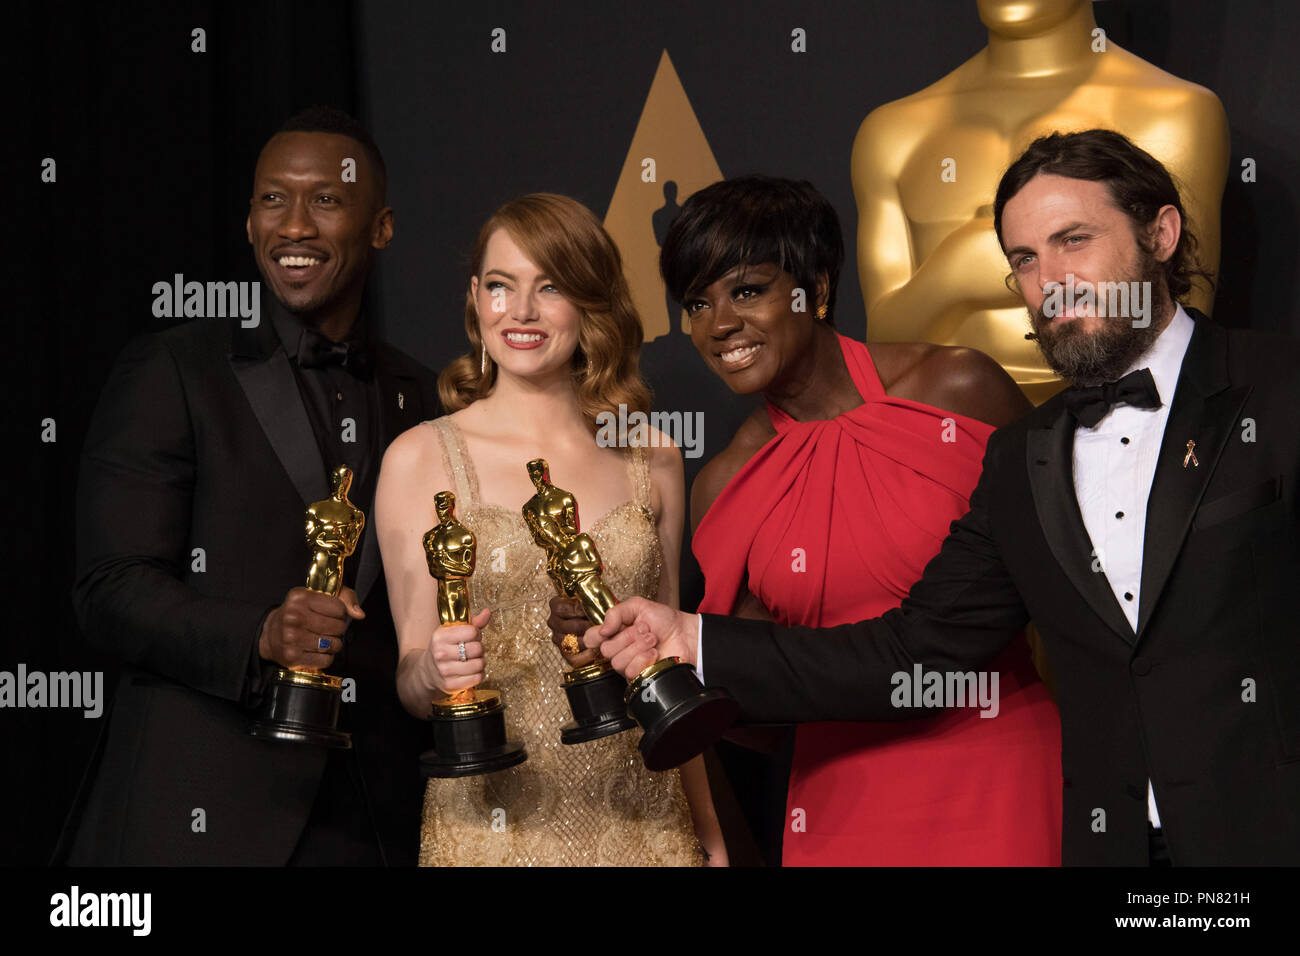 Backstage posing with their Oscars®, Mahershala Ali, Actor in a Supporting Role; Emma Stone, Actress in a Leading Role; Viola Davis, Actress in a Supporting Role; and Casey Affleck, Actor in a Leading Role backstage during The 89th Oscars® at the Dolby® Theatre in Hollywood, CA on Sunday, February 26, 2017.  File Reference # 33242 553THA  For Editorial Use Only -  All Rights Reserved Stock Photo